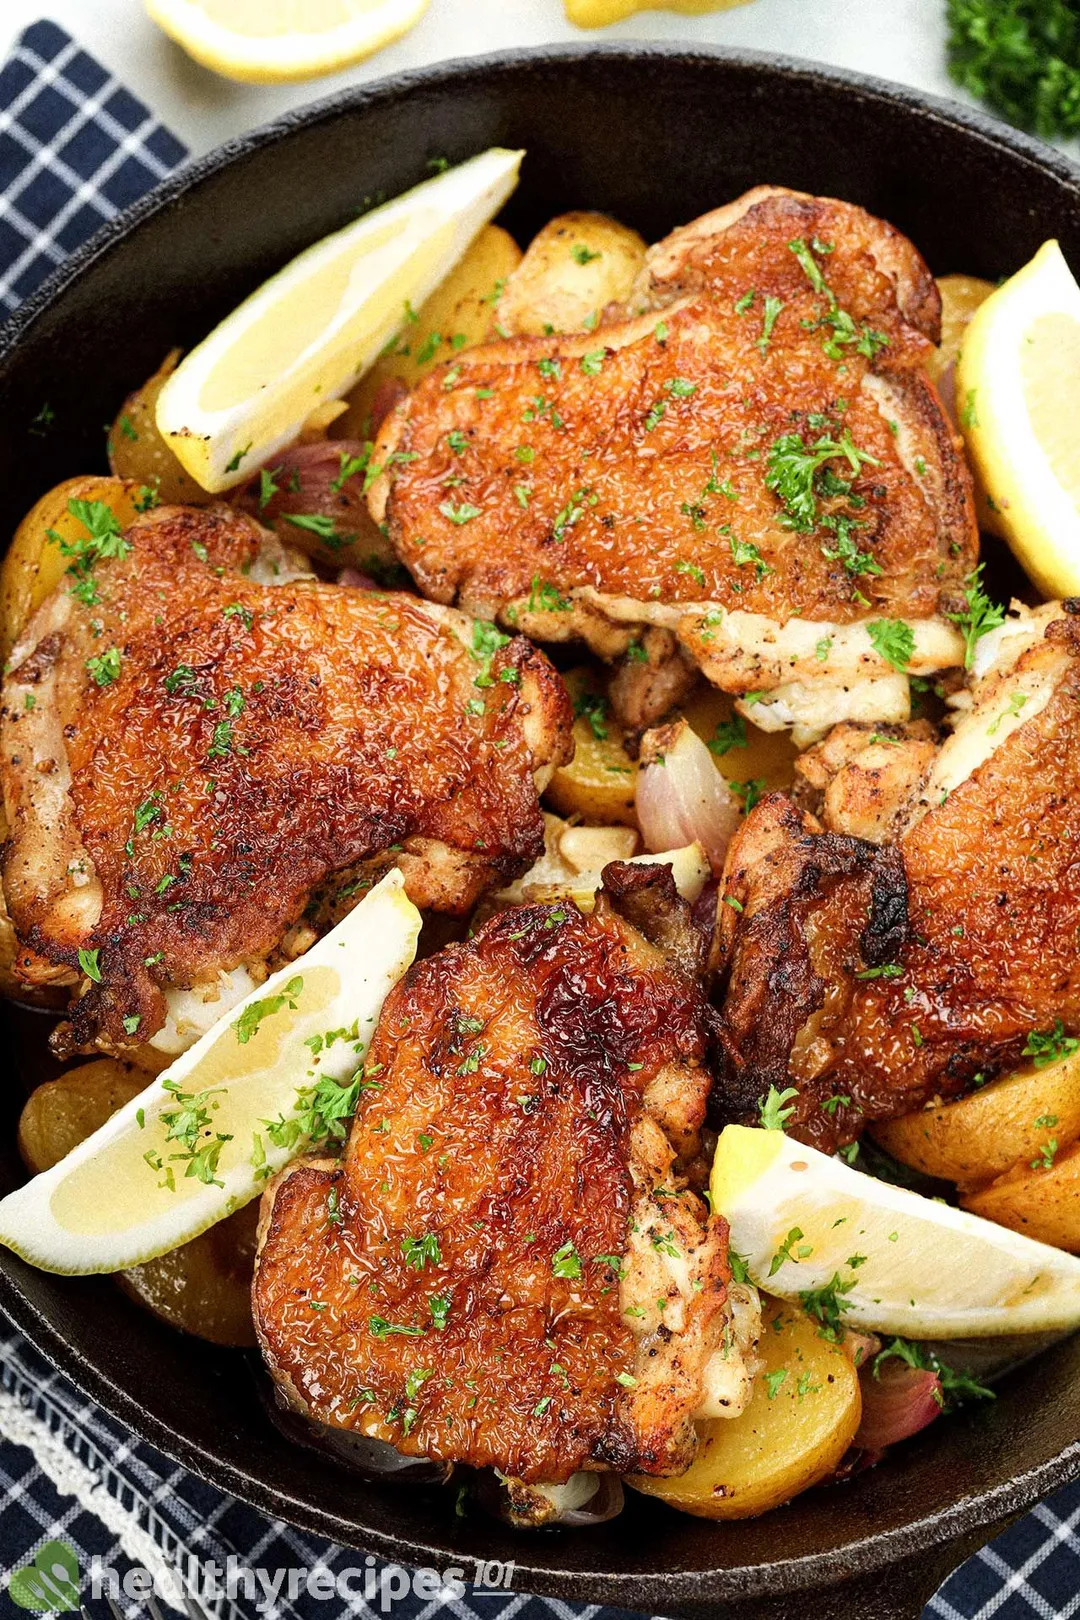 A deep skillet filled with browned and cooked chicken thighs, lemon wedges, and baby potato halves